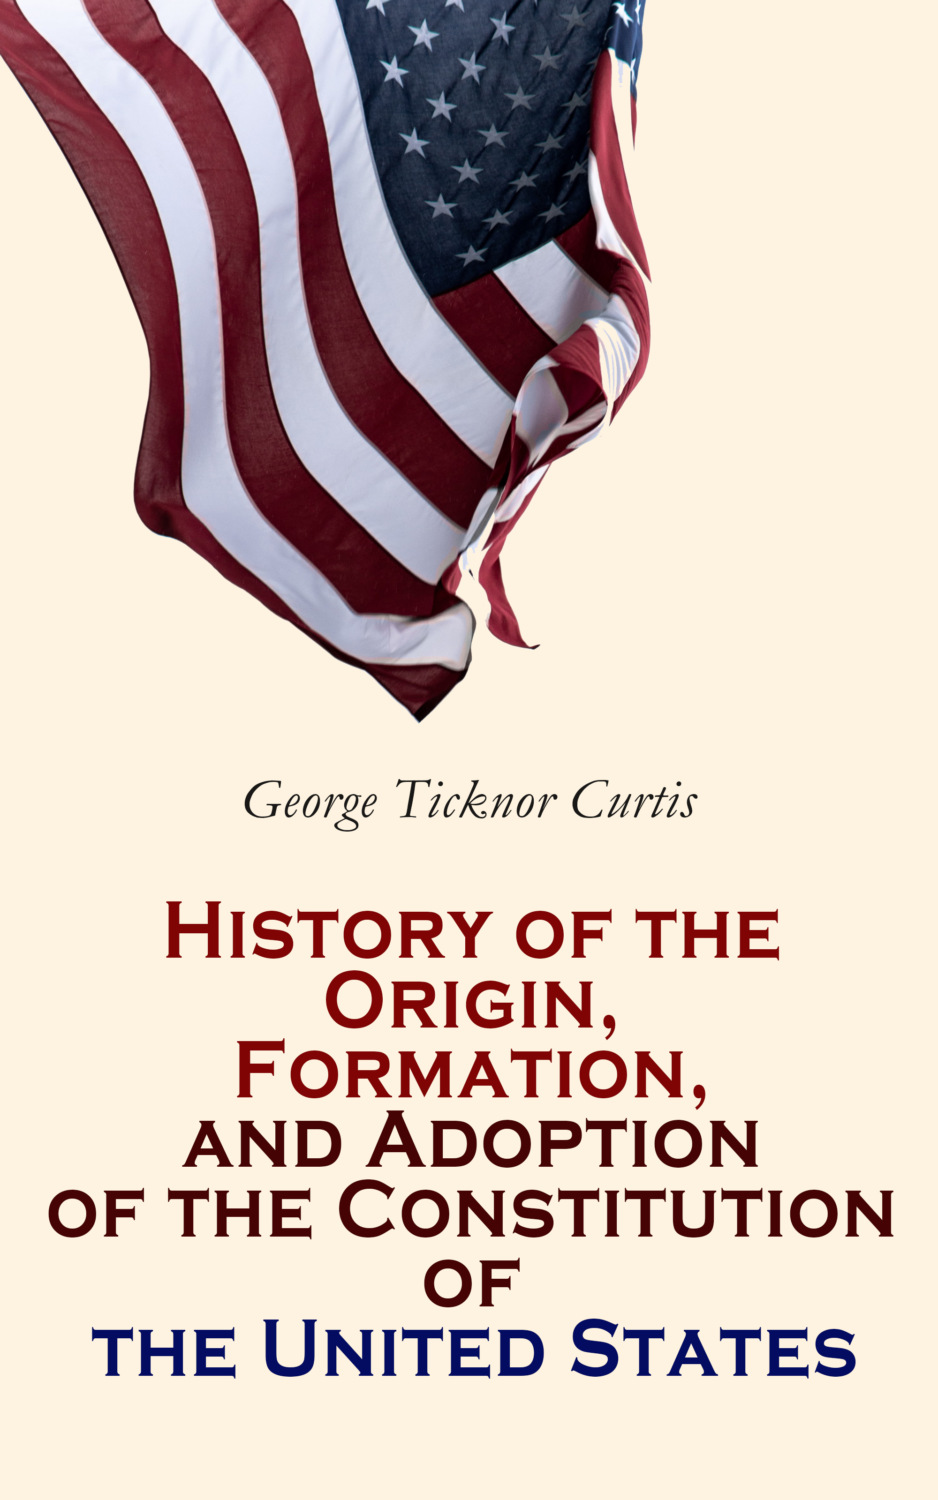 history-of-the-origin-formation-and-adoption-of-the-constitution-of